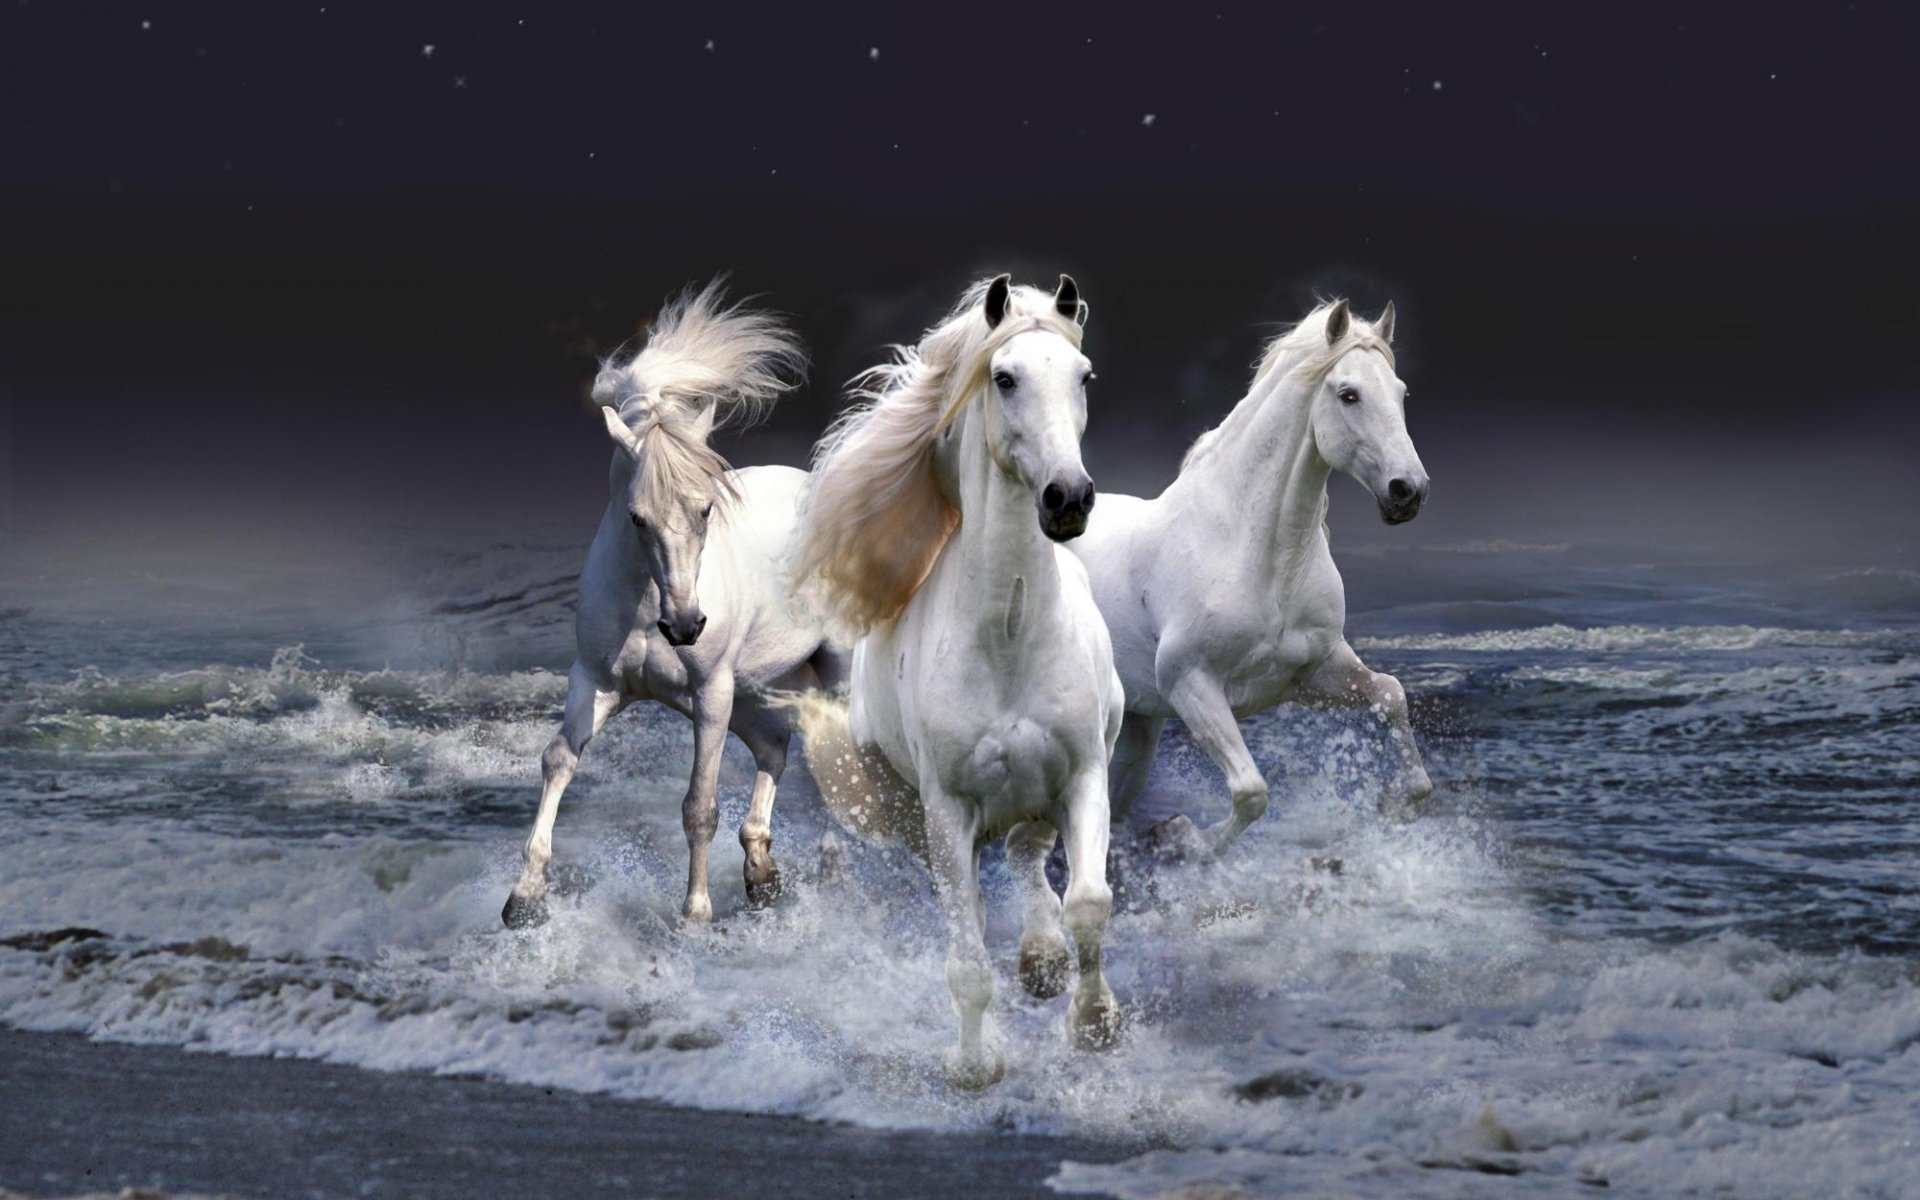 Download Horses wallpaper for mobile phone, free Horses HD picture